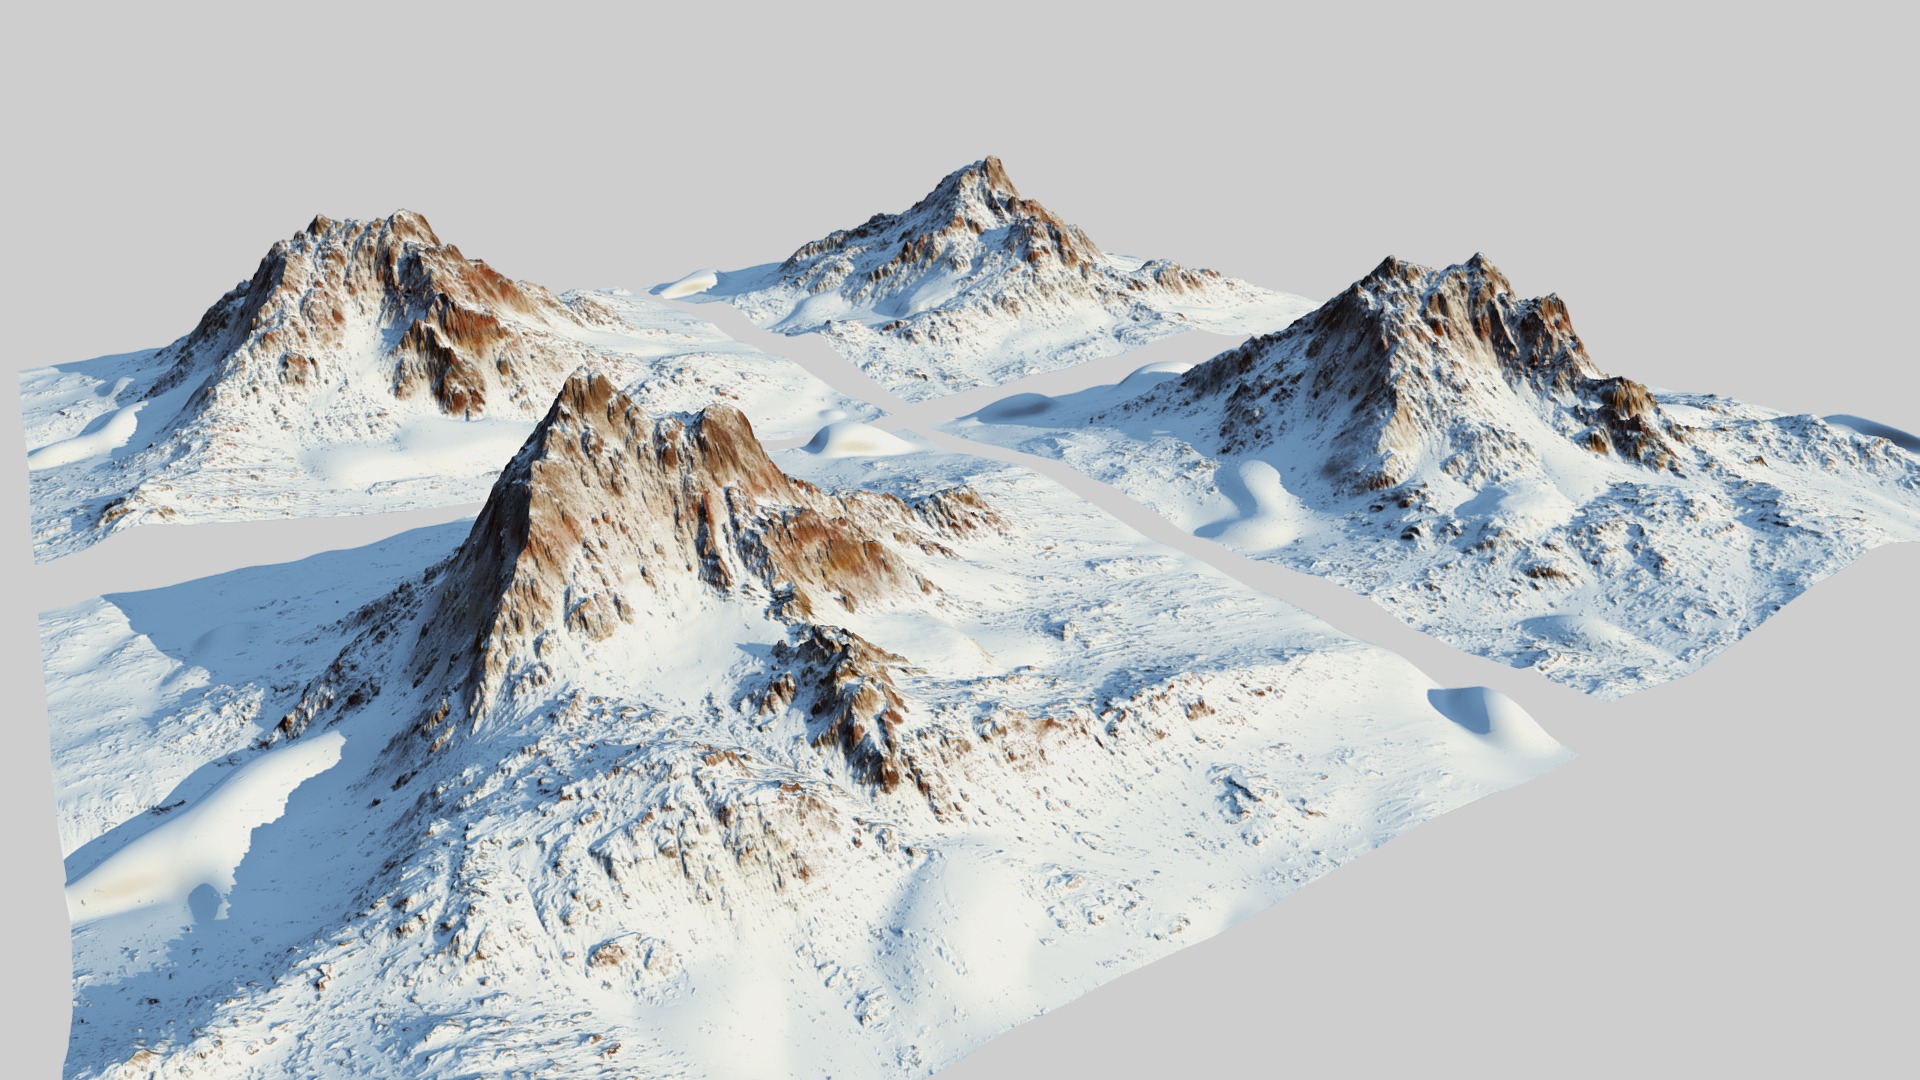 3D model Snow mountain Pack (World Machine) Type1 - This is a 3D model of the Snow mountain Pack (World Machine) Type1. The 3D model is about a snowy mountain with a few peaks.